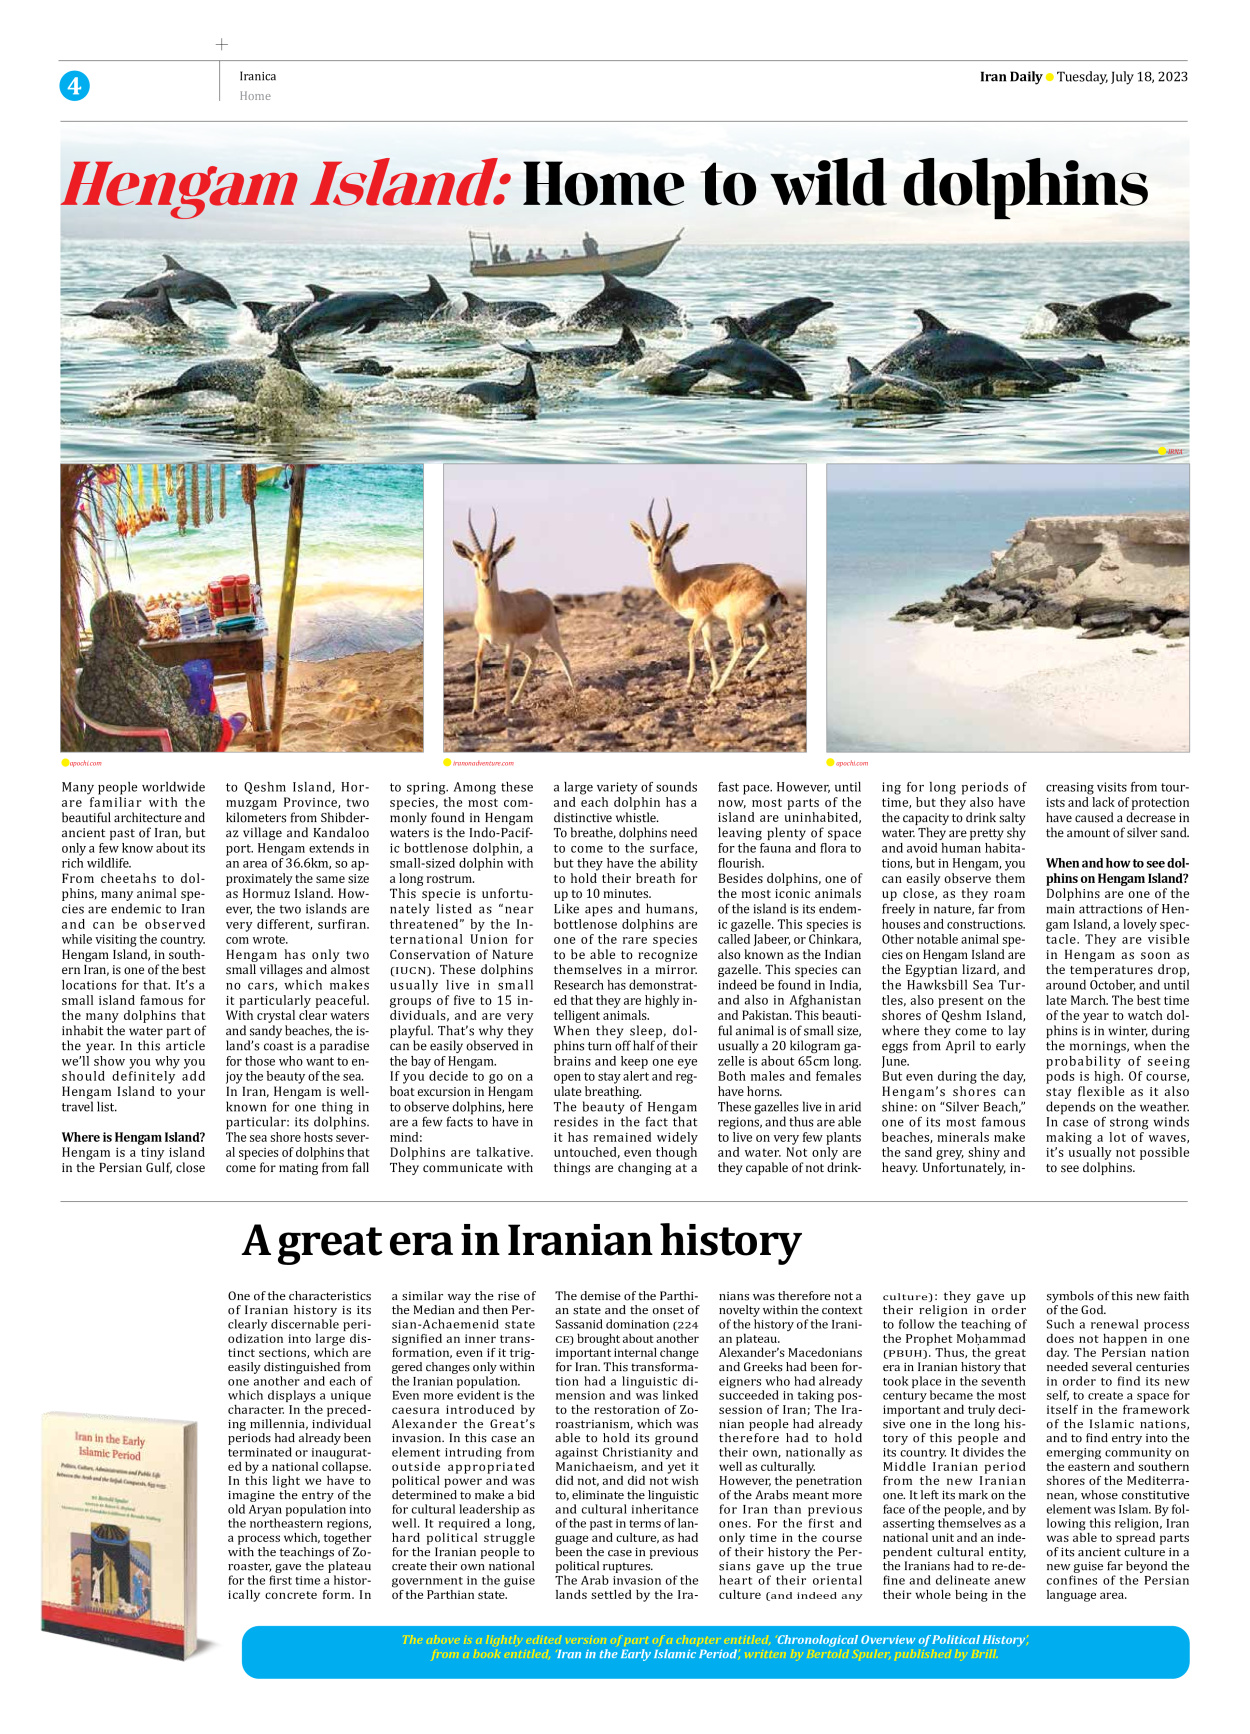 Iran Daily - Number Seven Thousand Three Hundred and Forty Two - 17 July 2023 - Page 4